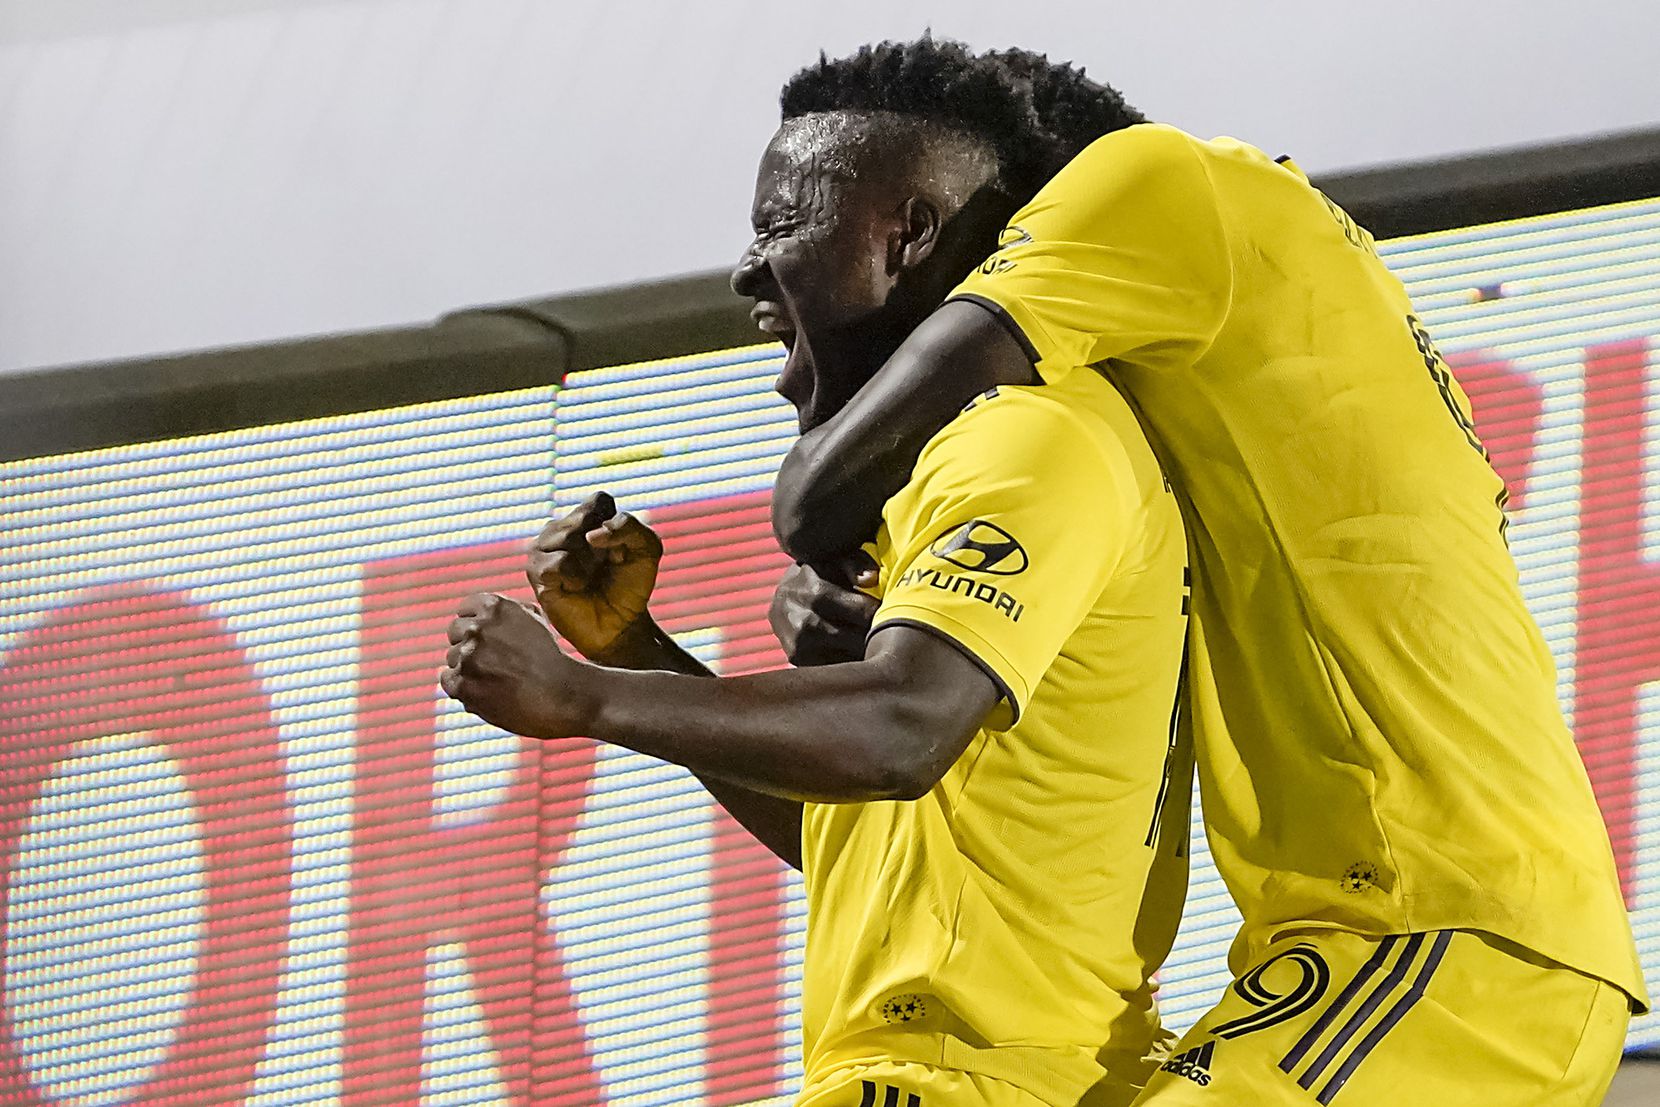 Nashville SC forward David Accam (11) celebrates with forward Dominique Badji (9) after scoring during the 86th minute of a 1-0 victory over FC Dallas in an MLS soccer game at Toyota Stadium on Wednesday, Aug. 12, 2020, in Frisco, Texas. (Smiley N. Pool/The Dallas Morning News)